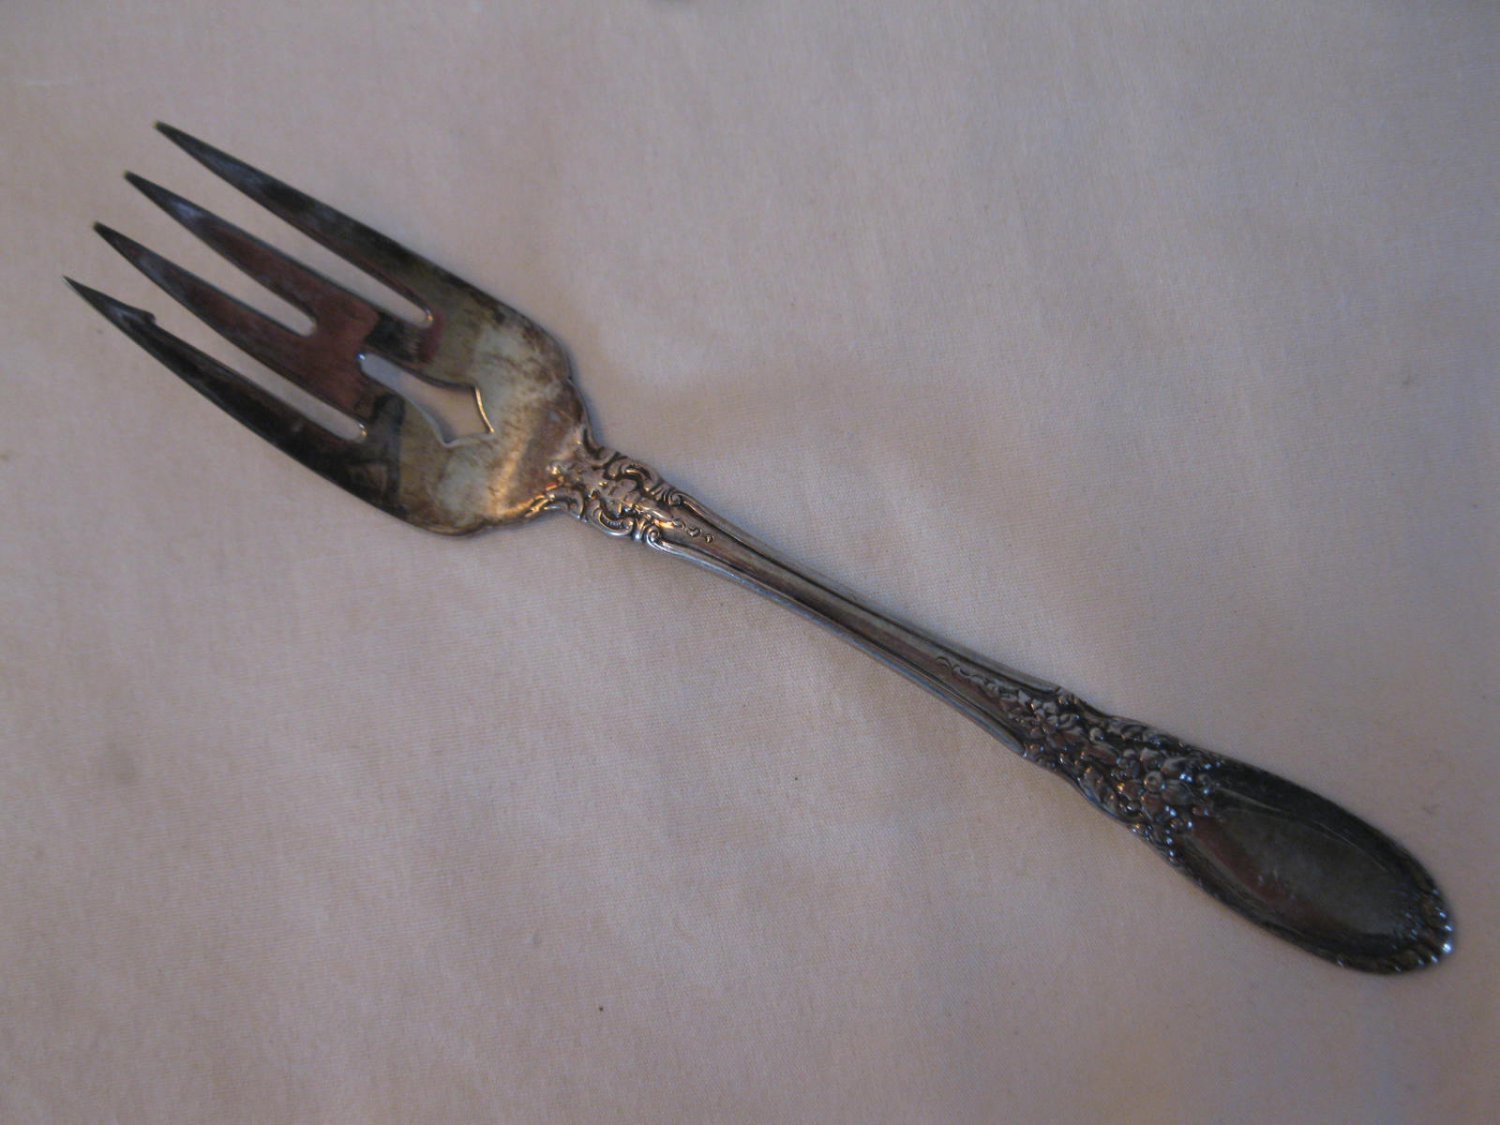 Towle E.P. 1980 Old Mirror Pattern Silver Plated 6.5" Dessert Fork #1